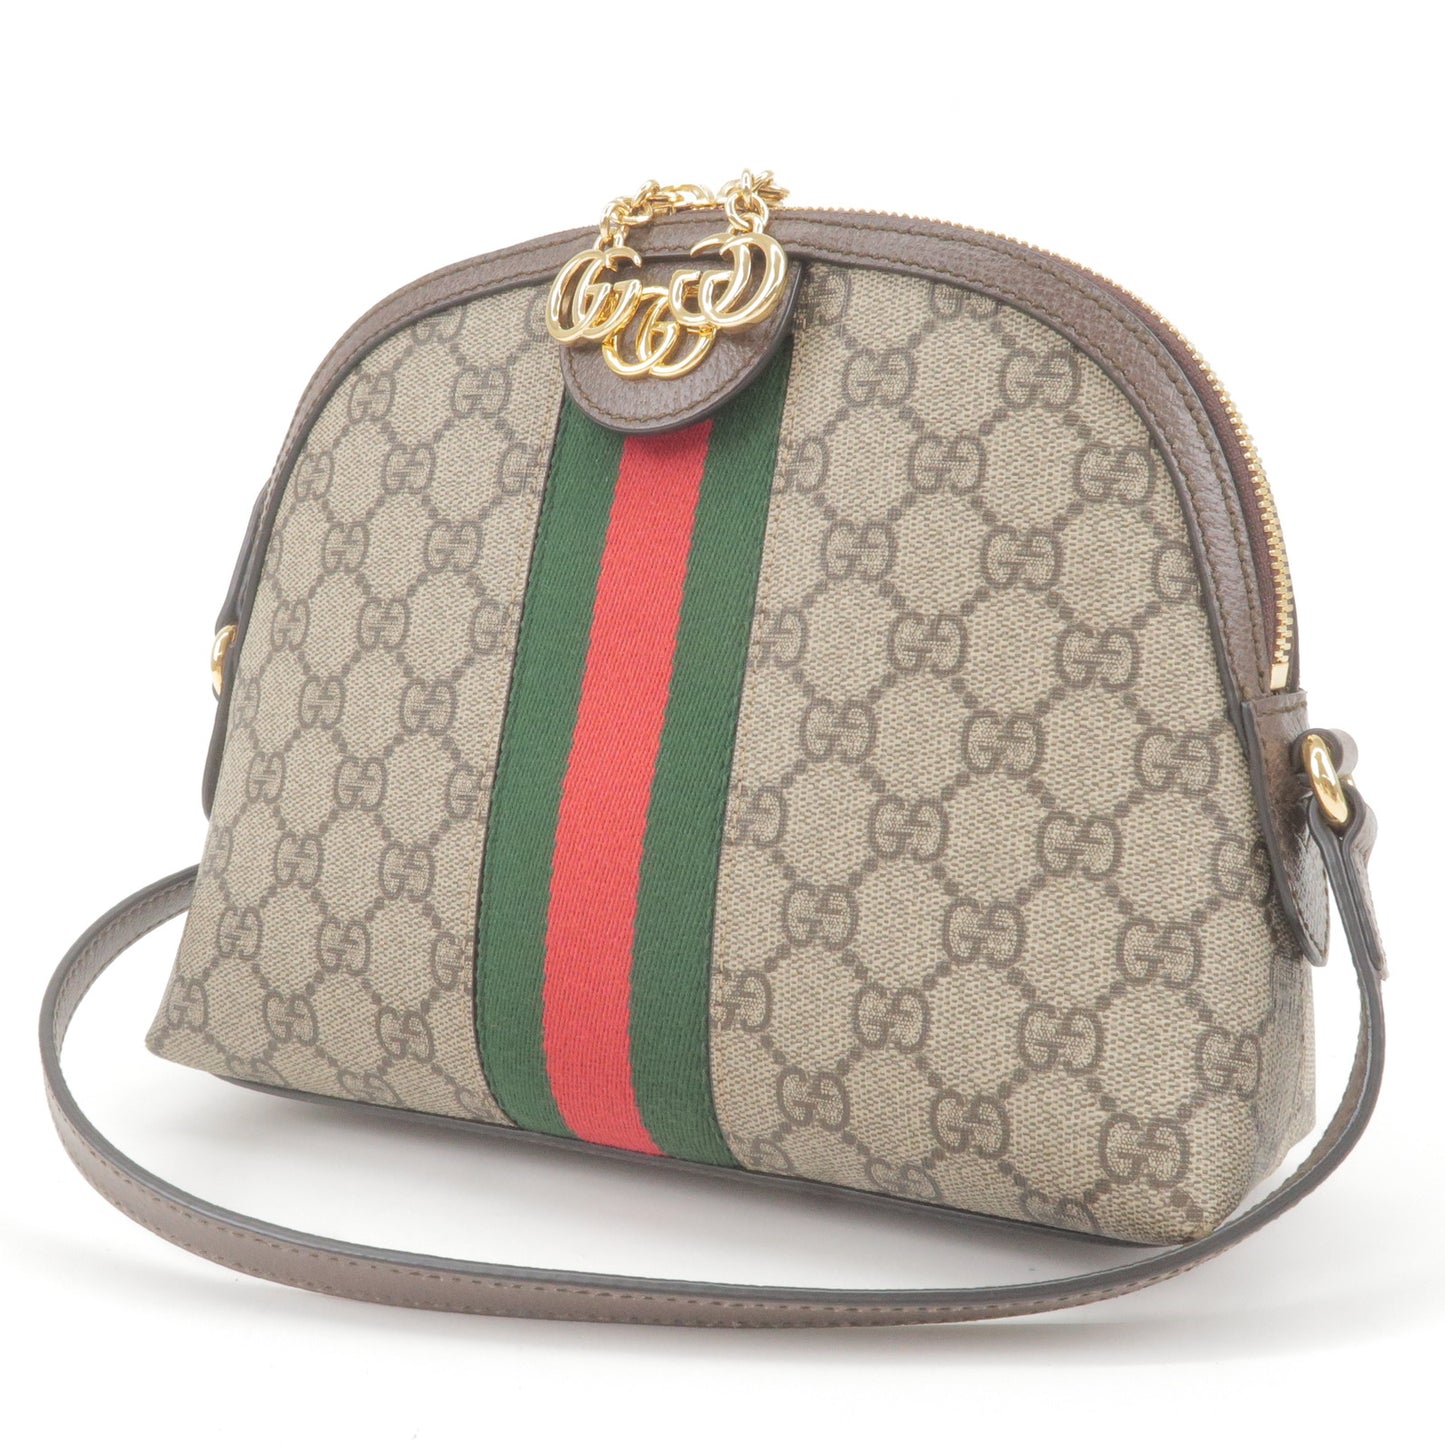 GUCCI Ophidia Sherry GG Supreme Leather Shoulder Bag 499621